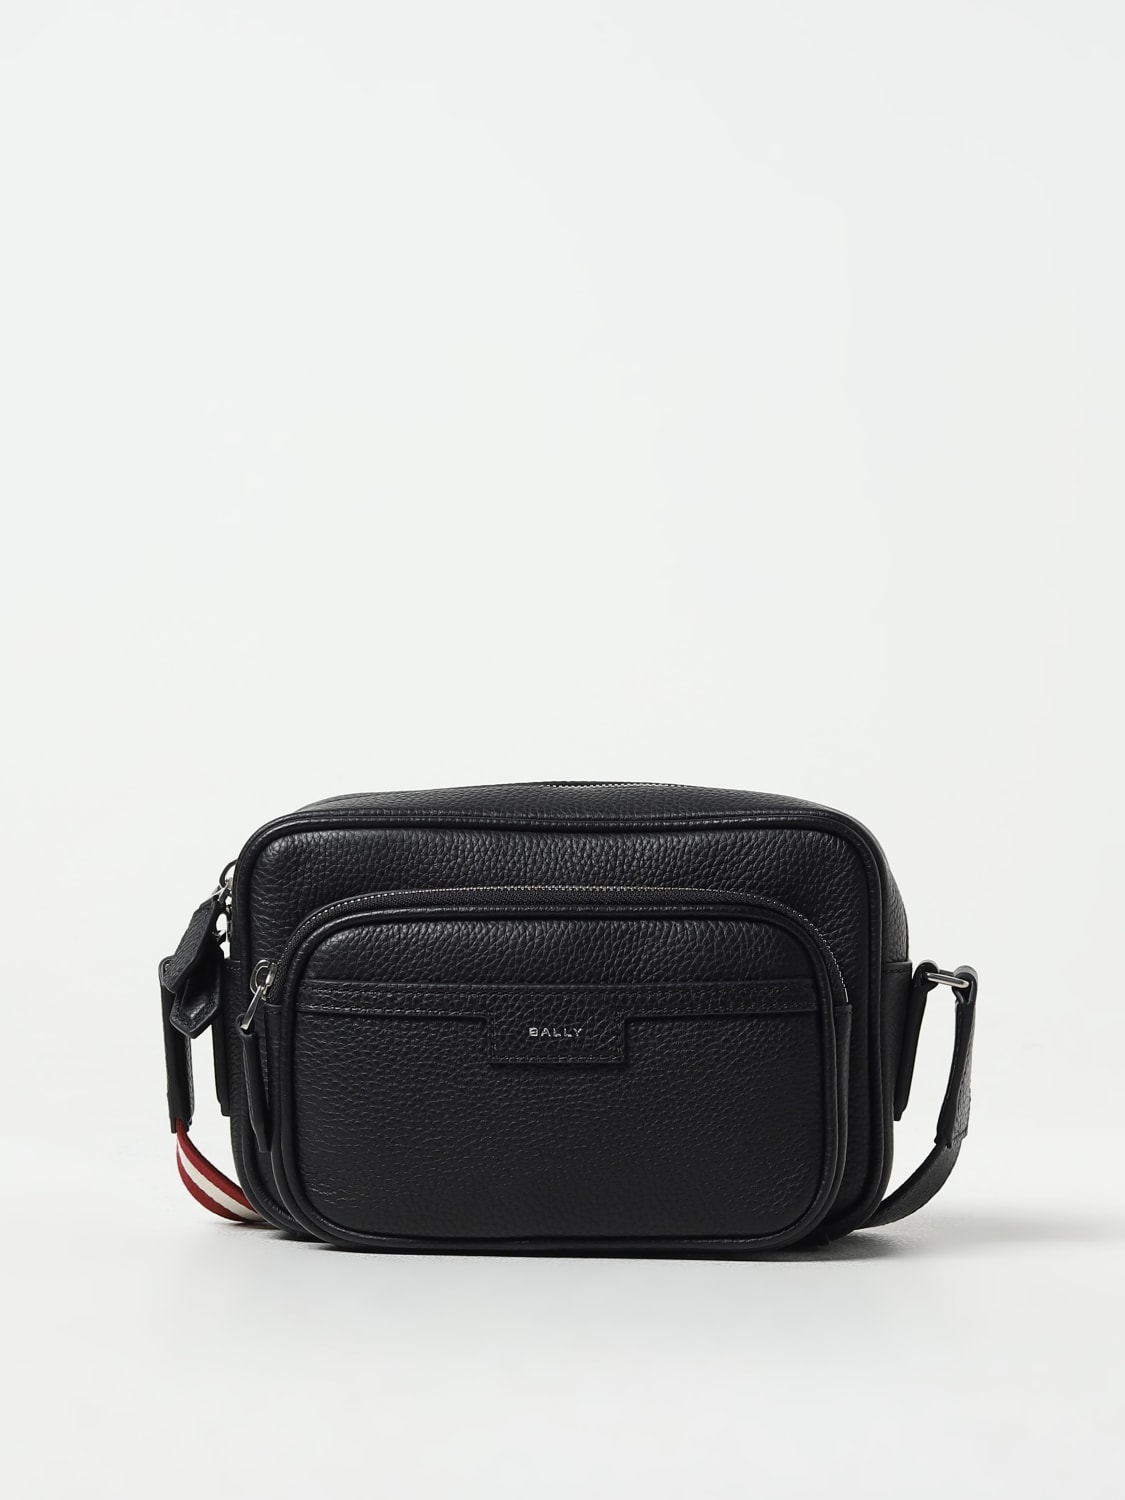 Bally Code grained leather tote bag - Black